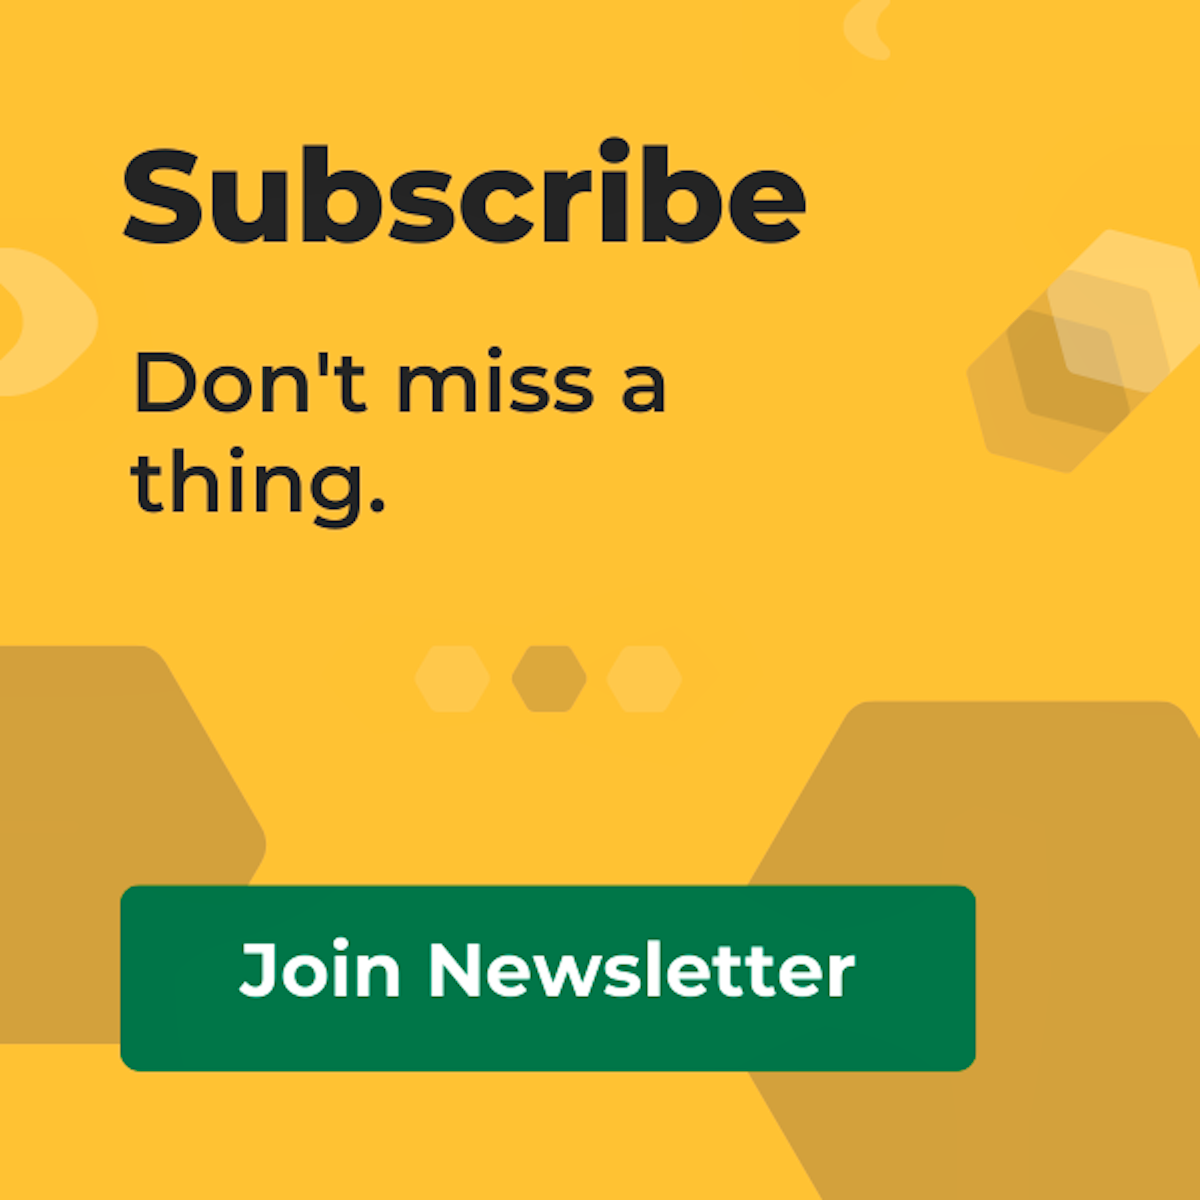 Subscribe - Don't miss a thing. Click to join newsletter.